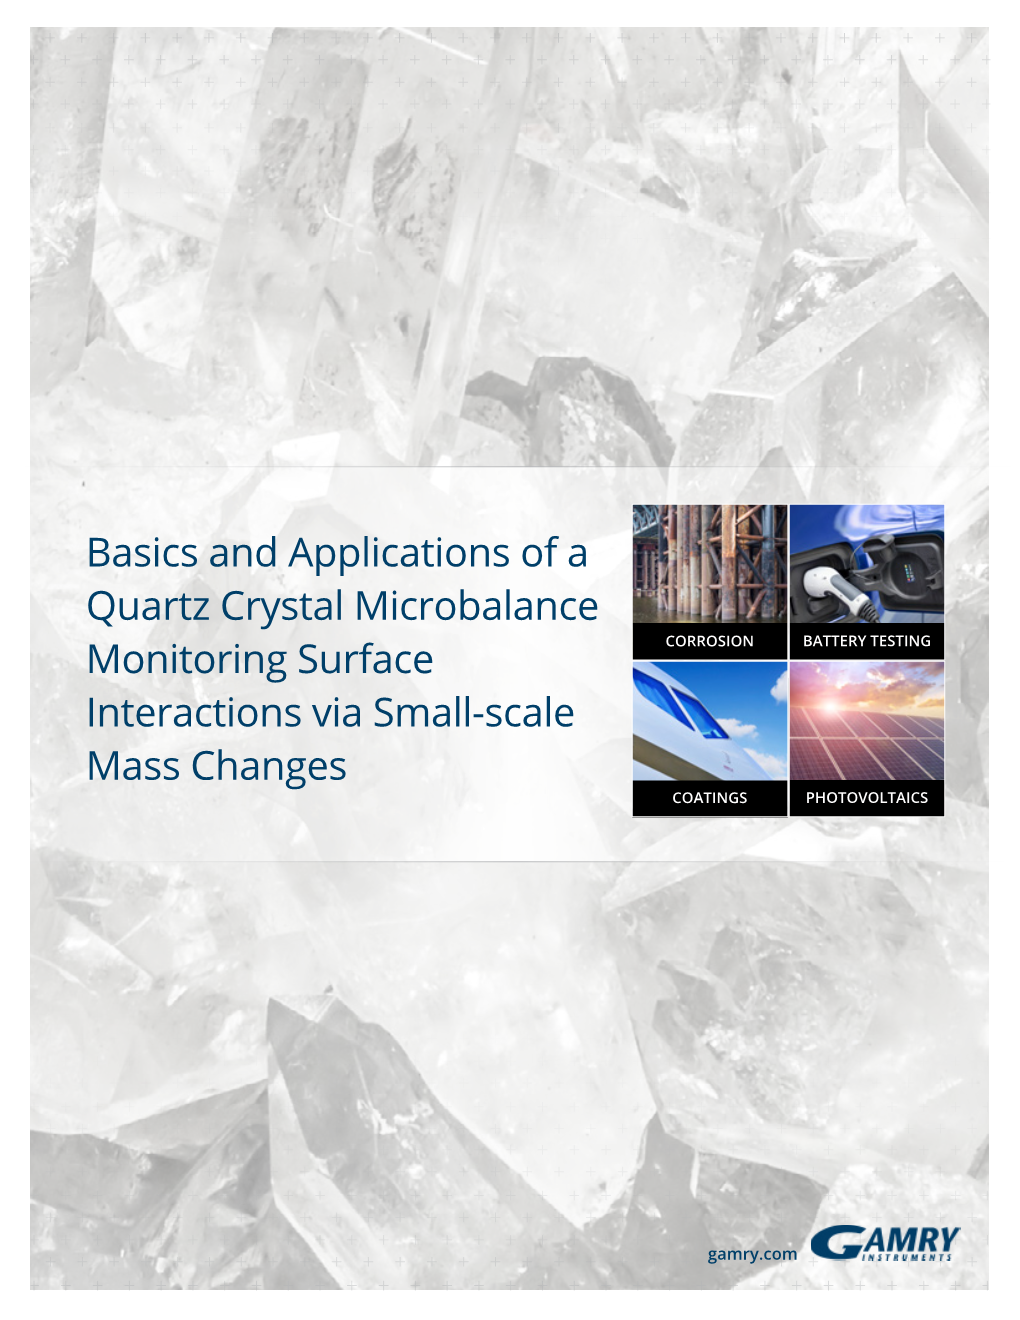 Basics and Applications of a Quartz Crystal Microbalance Monitoring Surface Interactions Via Small-Scale Mass Changes